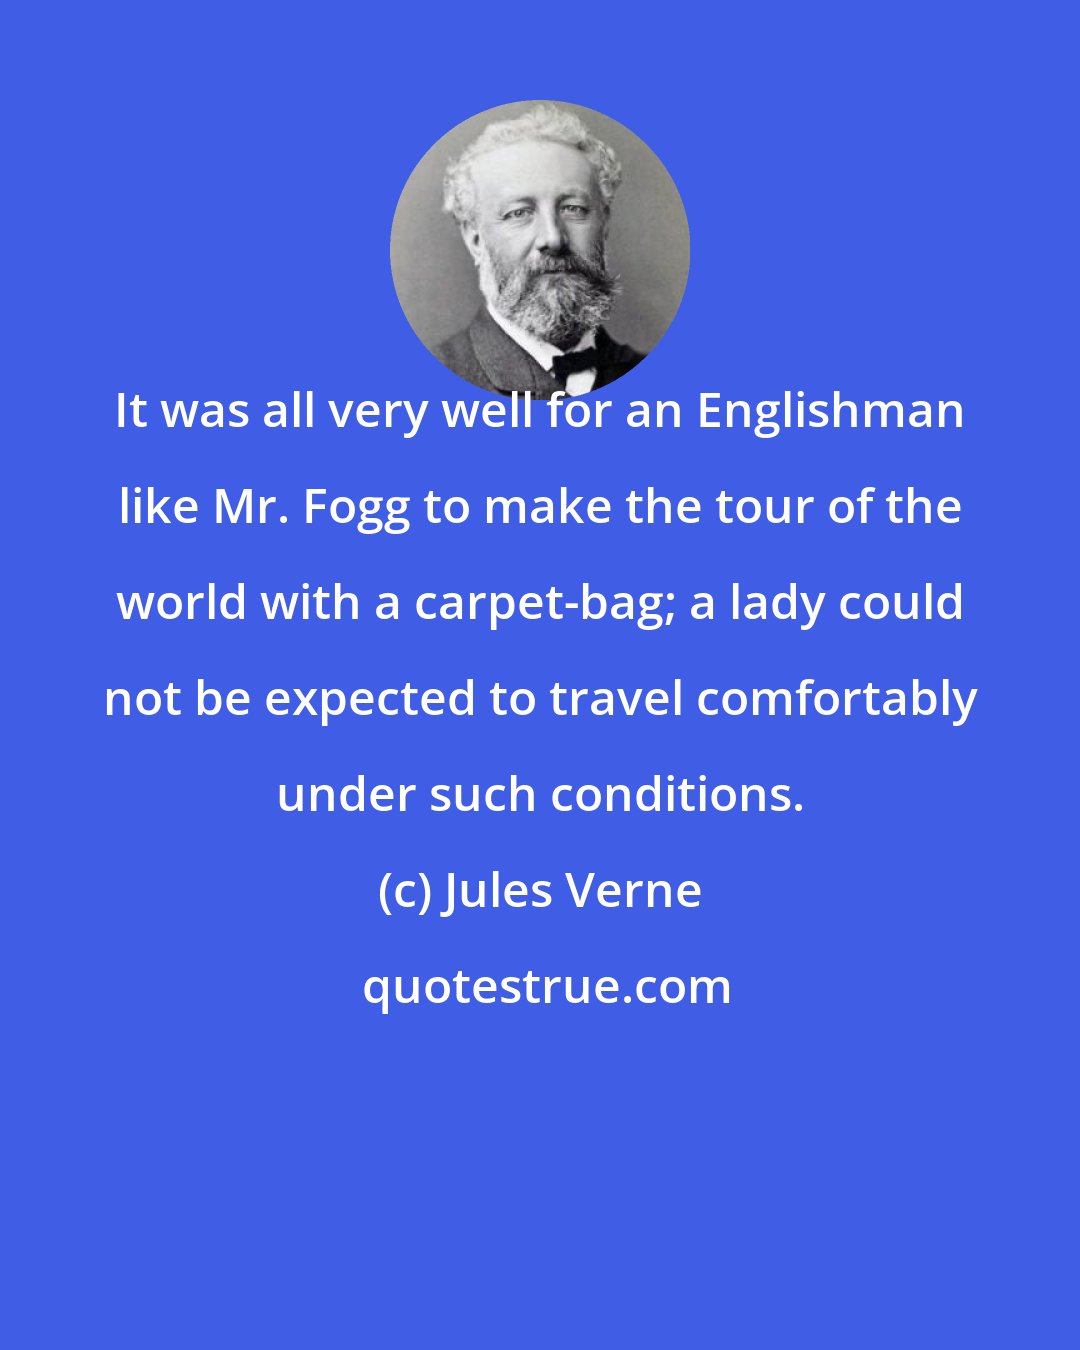 Jules Verne: It was all very well for an Englishman like Mr. Fogg to make the tour of the world with a carpet-bag; a lady could not be expected to travel comfortably under such conditions.